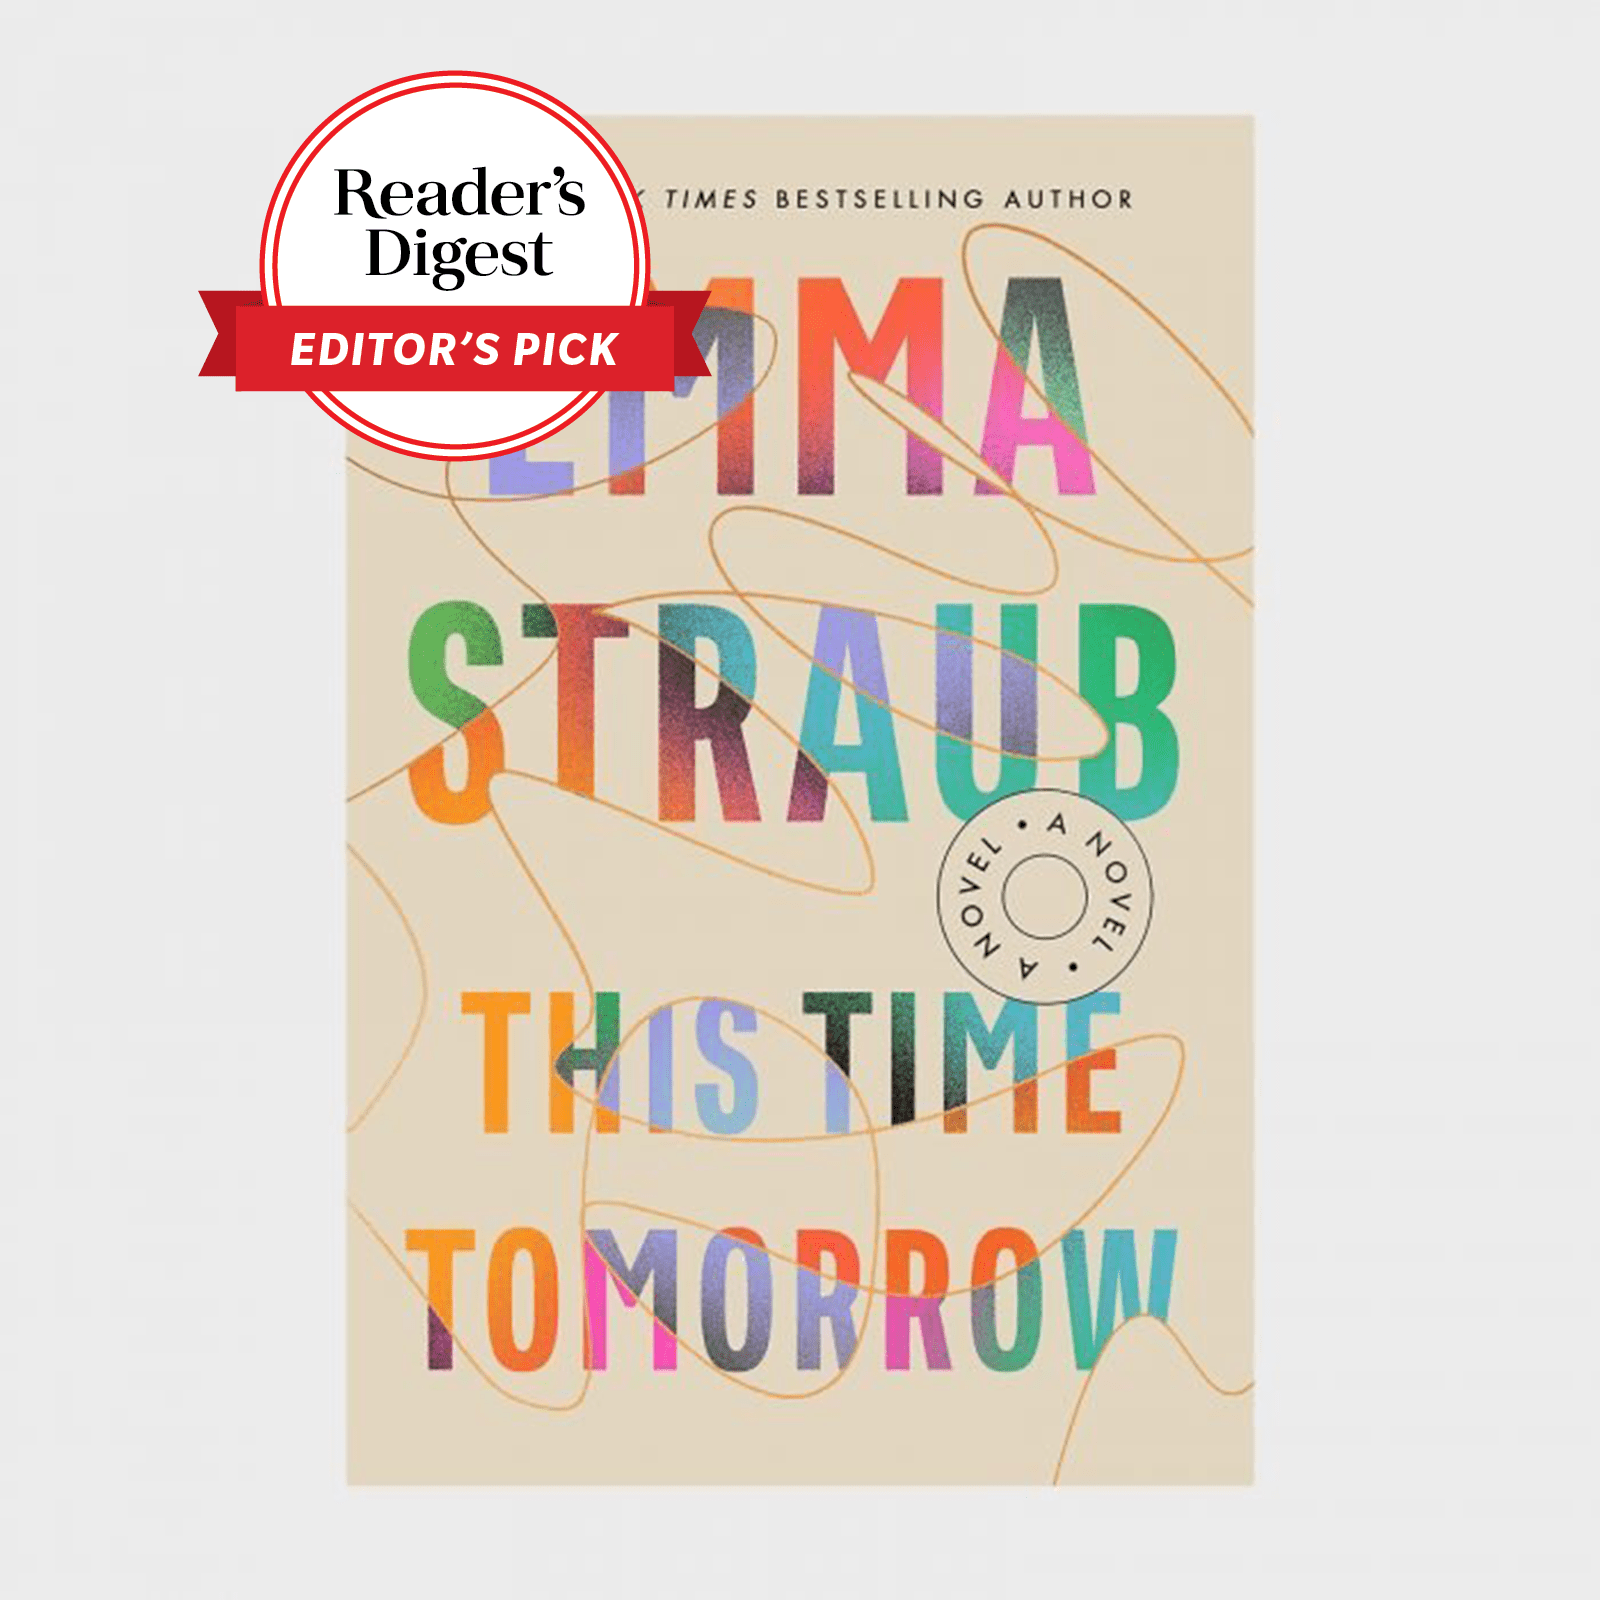 <p><strong>Release date:</strong> May 17, 2022</p> <p>In <a href="https://www.amazon.com/This-Time-Tomorrow-Emma-Straub/dp/052553900X/" rel="noopener noreferrer"><em>This Time Tomorrow</em></a>, prolific author Emma Straub plays with <a href="https://www.rd.com/list/science-fiction-books/">time travel</a> like these <a href="https://www.rd.com/list/time-travel-books/">time travel books</a>. On the eve of her 40th birthday, protagonist Alice reflects on life—then suddenly wakes up on the morning of her Sweet 16. The book explores memories, longing and some of life's big questions, like what you might do differently if you could go back.</p> <p class="listicle-page__cta-button-shop"><a class="shop-btn" href="https://www.amazon.com/This-Time-Tomorrow-Emma-Straub/dp/052553900X/">Shop Now</a></p>